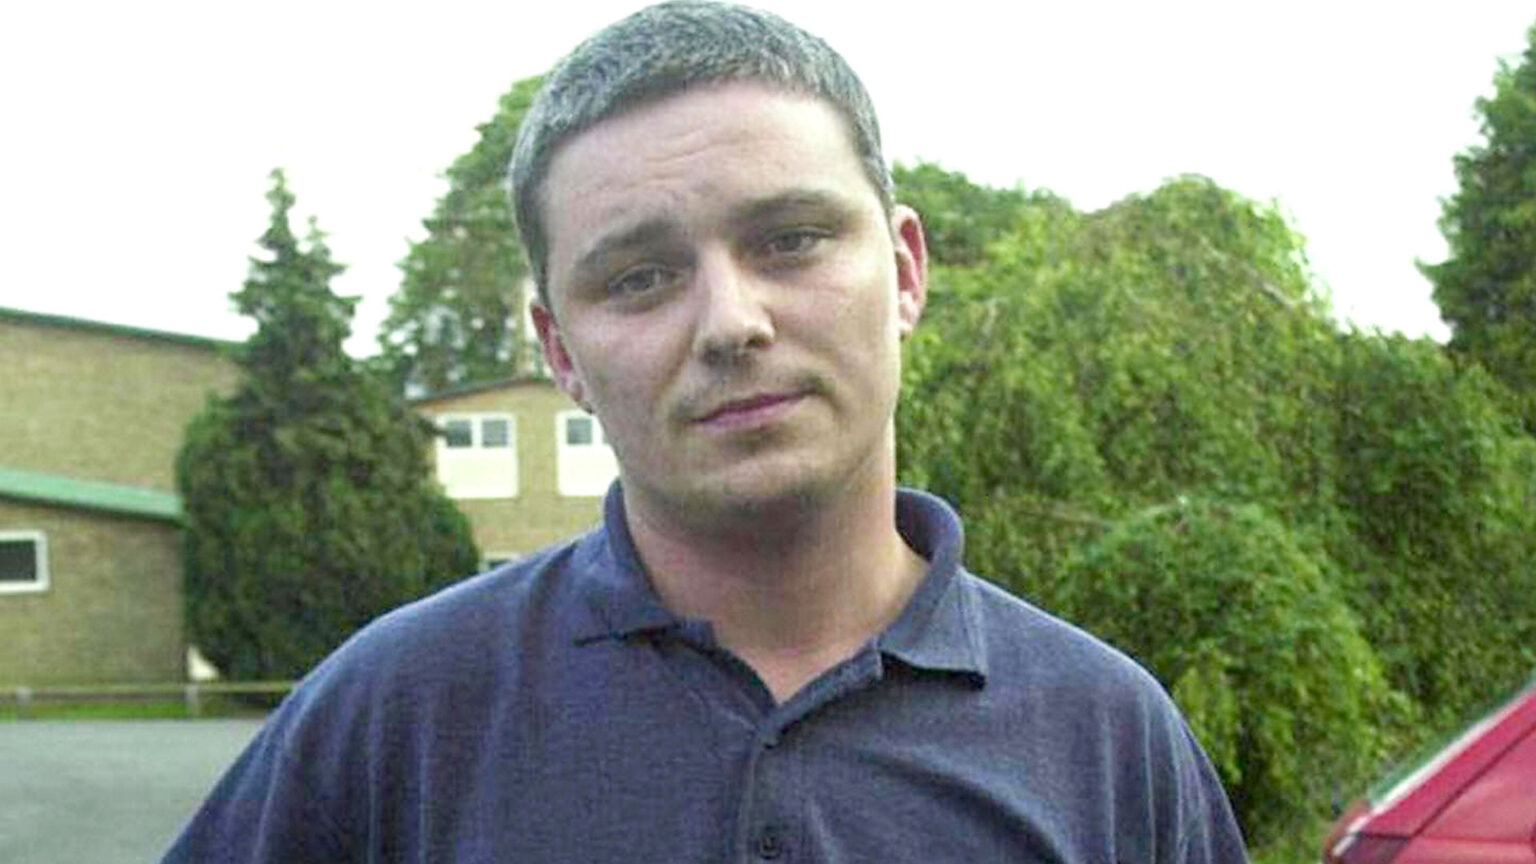 How Soham killer Ian Huntley was snared by 5 key mistakes including chilling comment